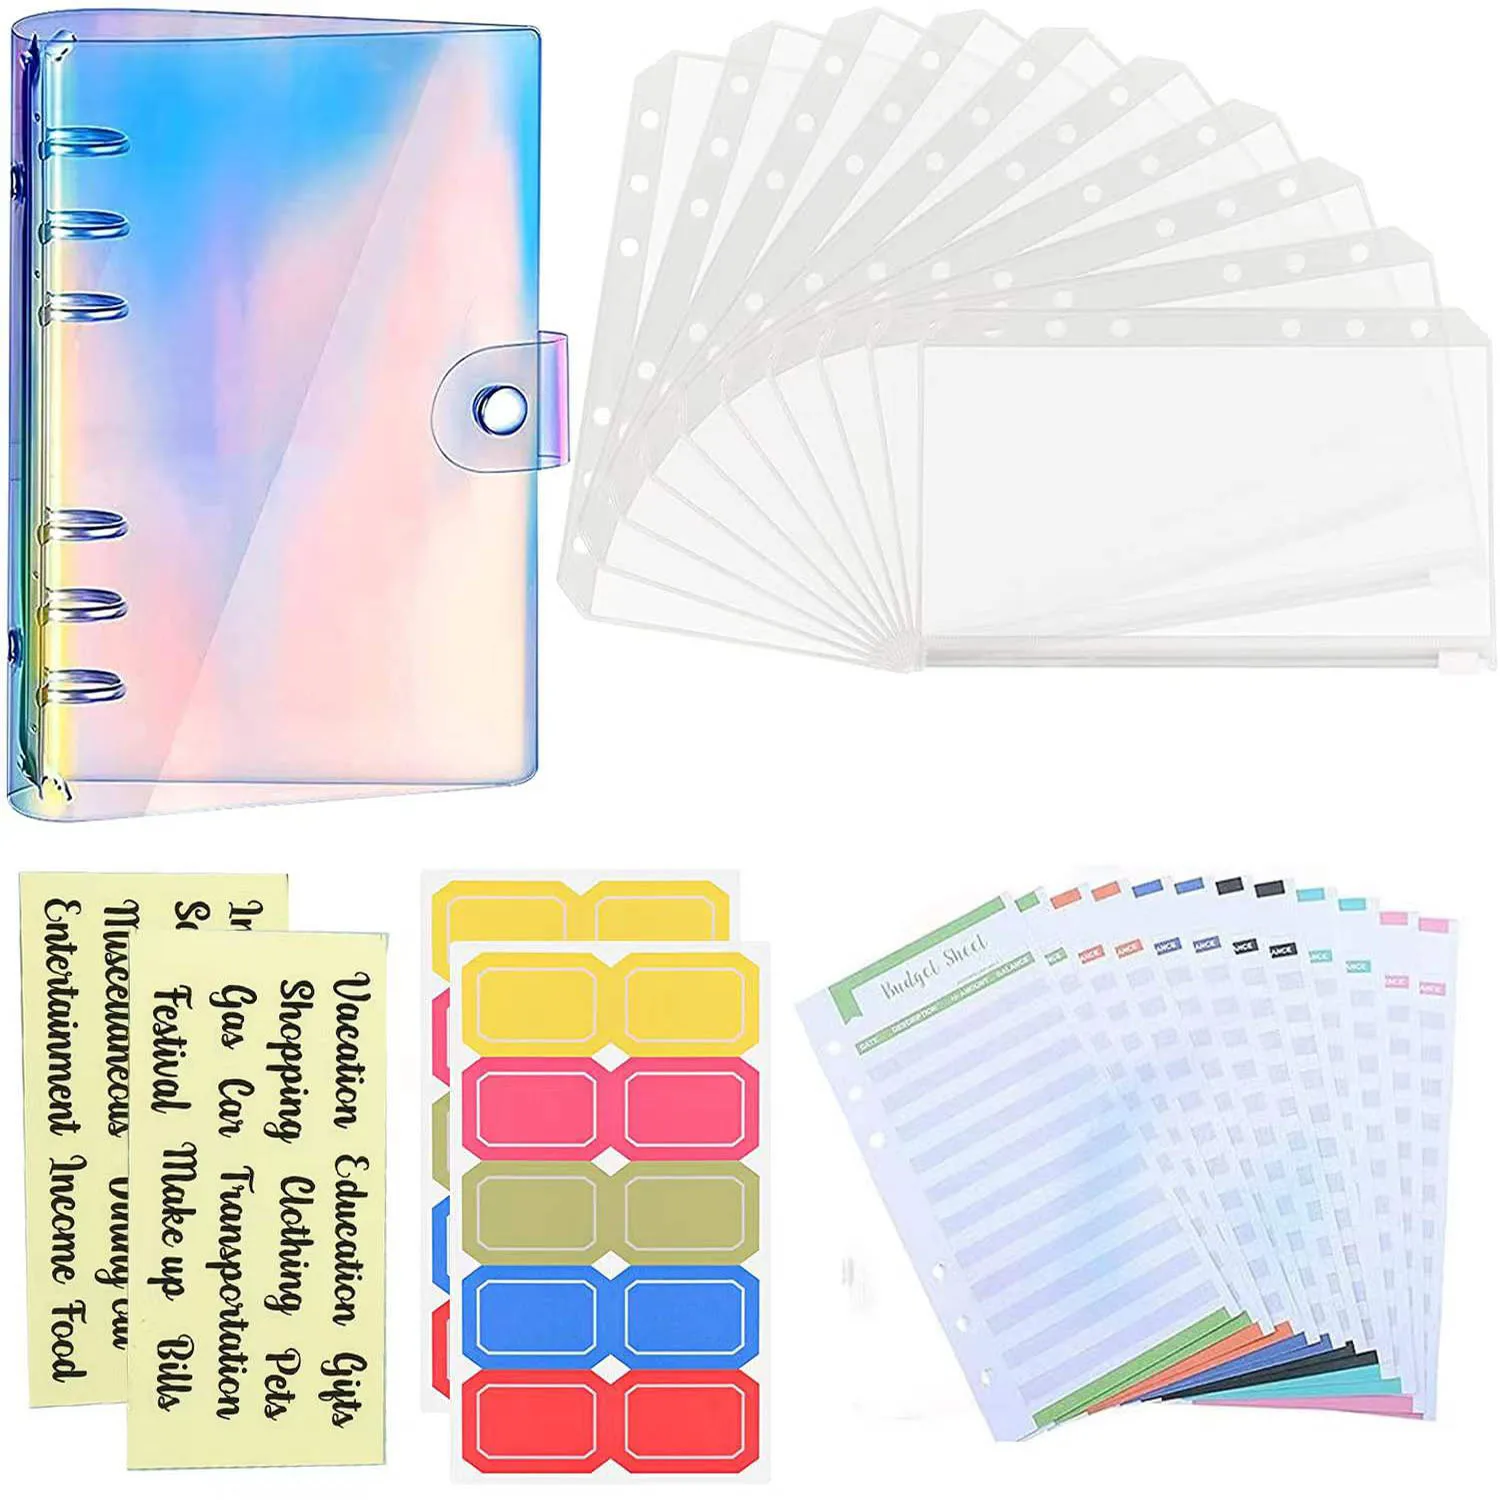 A6 Budget Binder Waterproof Cash Envelopes Notebook Organizer System with 10 Zipper Pockets,12 Budget Sheet and Label Stickers a6 pu leather notebook binder budget planner organizer with 12 pieces binder pockets and 12 pieces budget and 6 sheets stickers